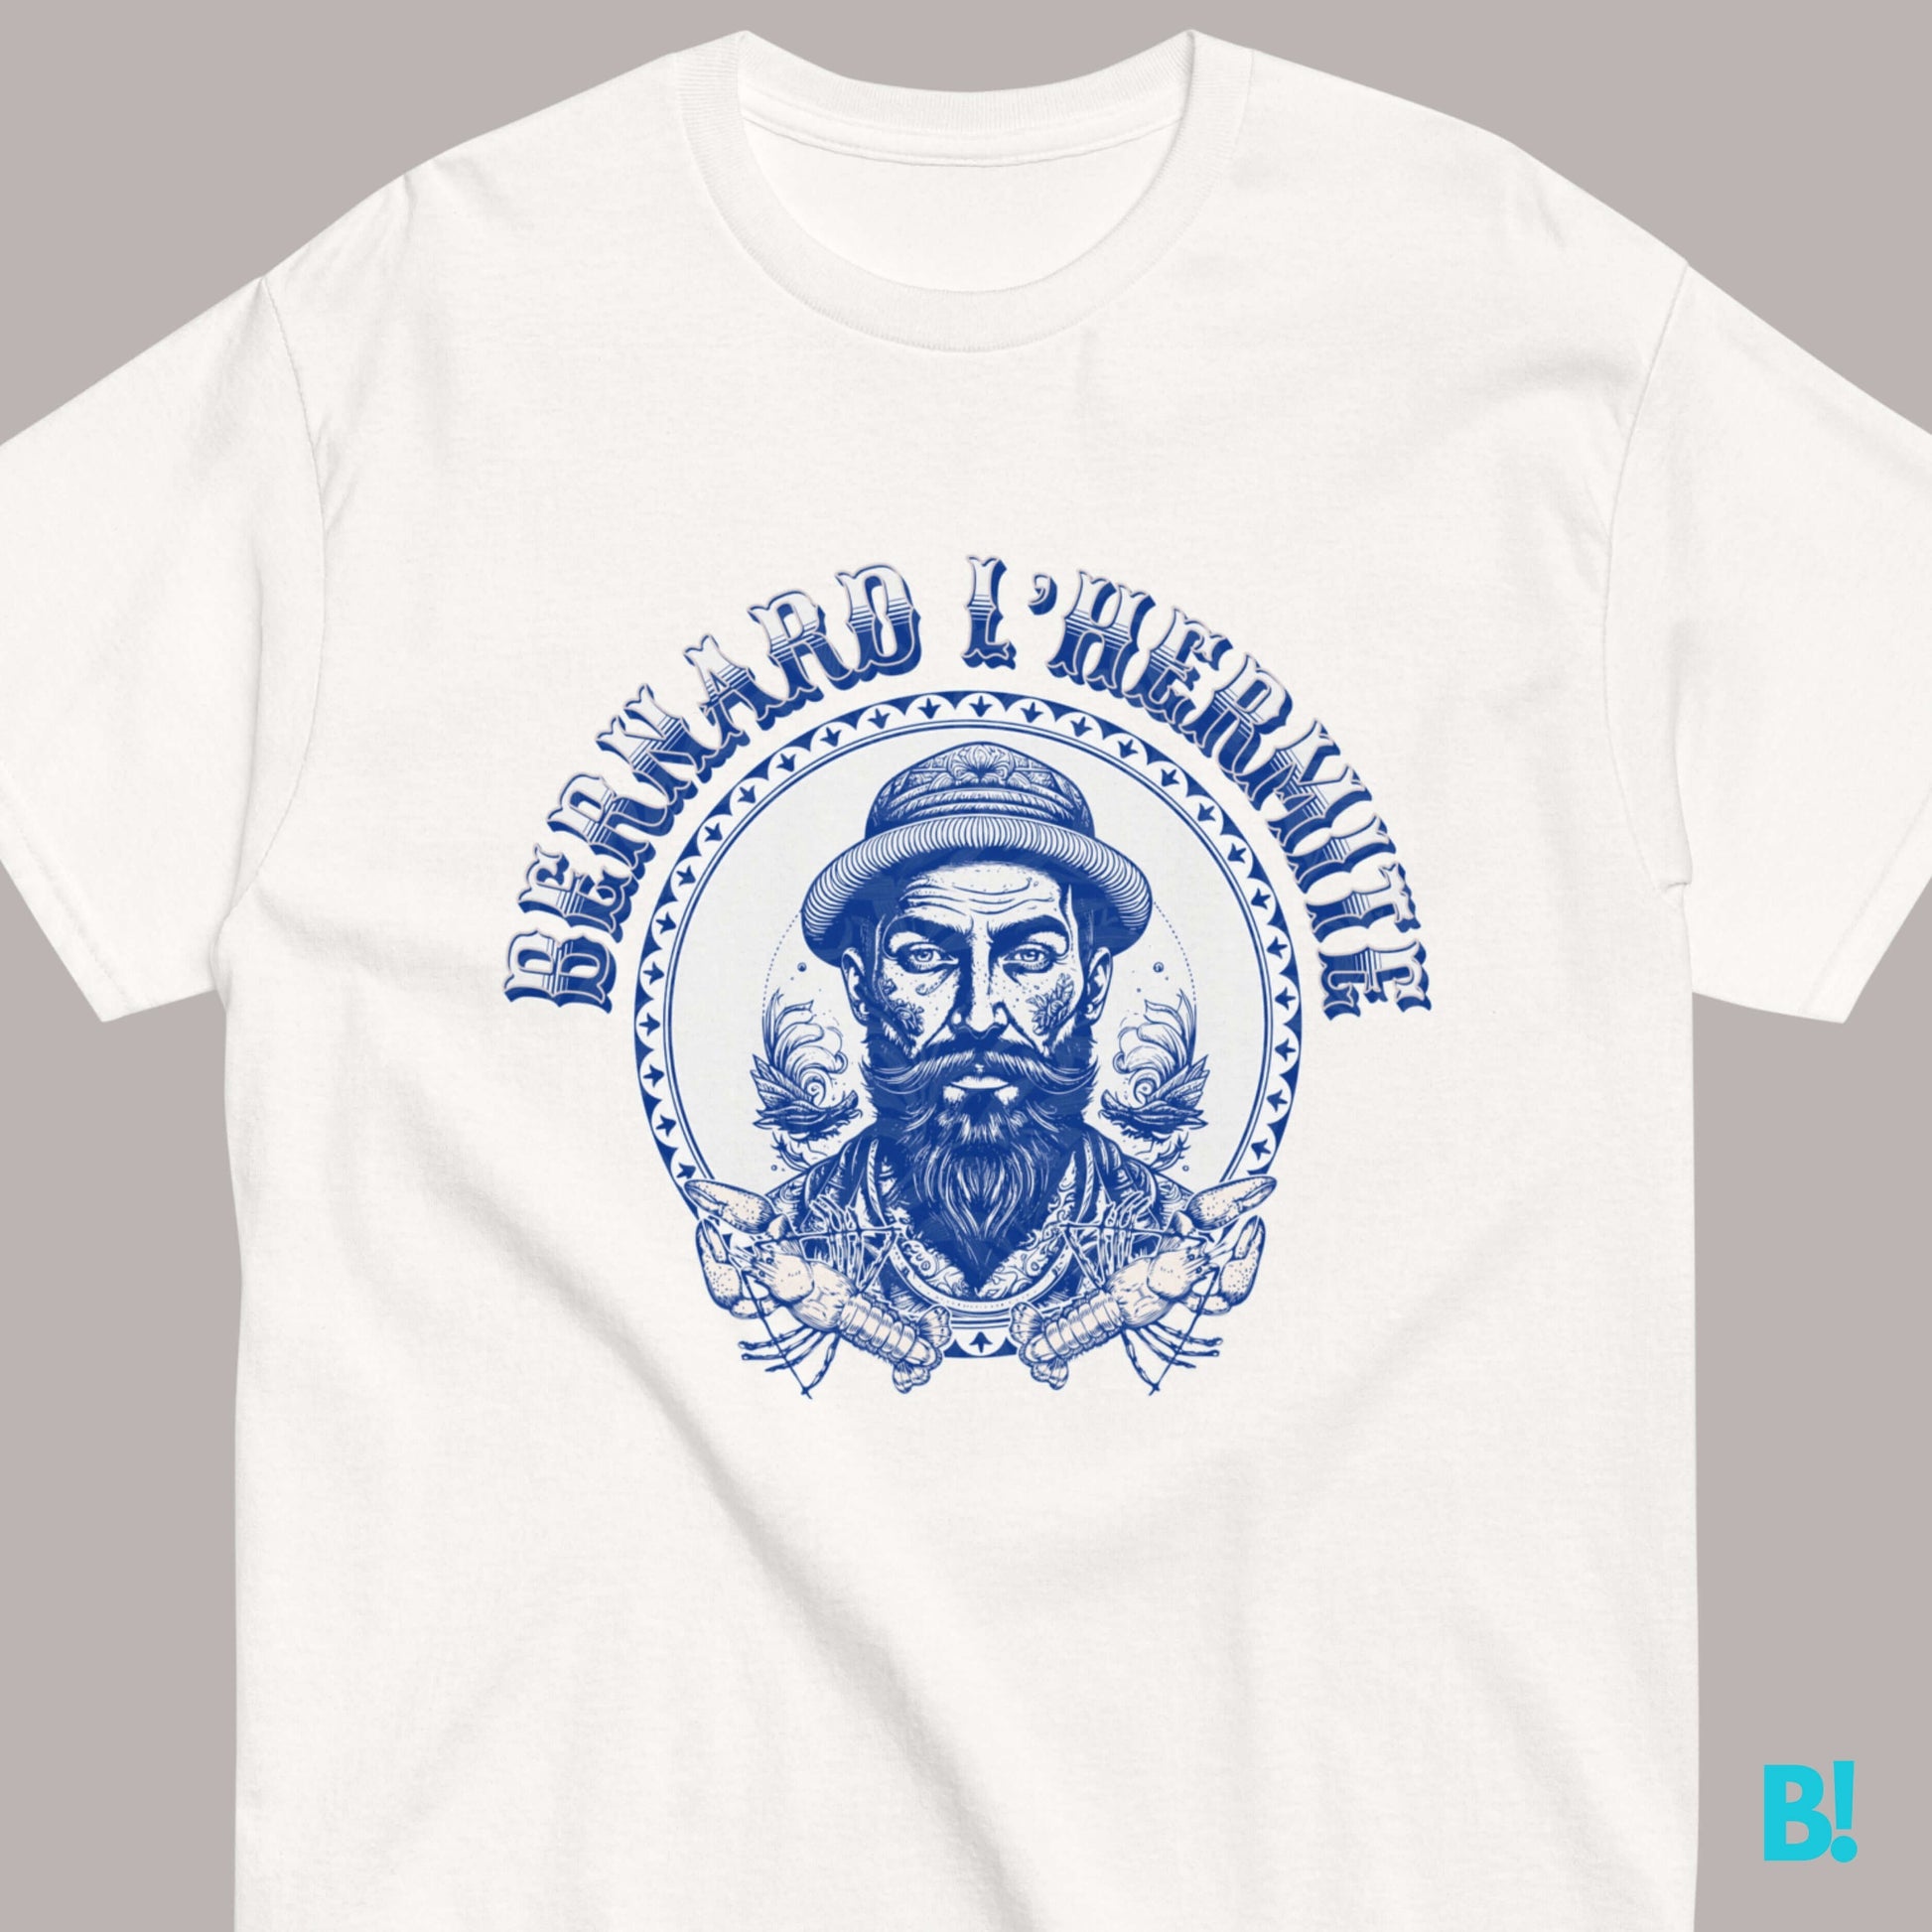 Bernard L'Hermite French Tattoo Retro Inspired Vintage T-Shirt Bonjour, adventurers! Find your fashion shell-titude with Bernard L'Hermite. This quirky tee is a tribute to French seaside charm. Embrace the spirit of exploration and embark on a journey of